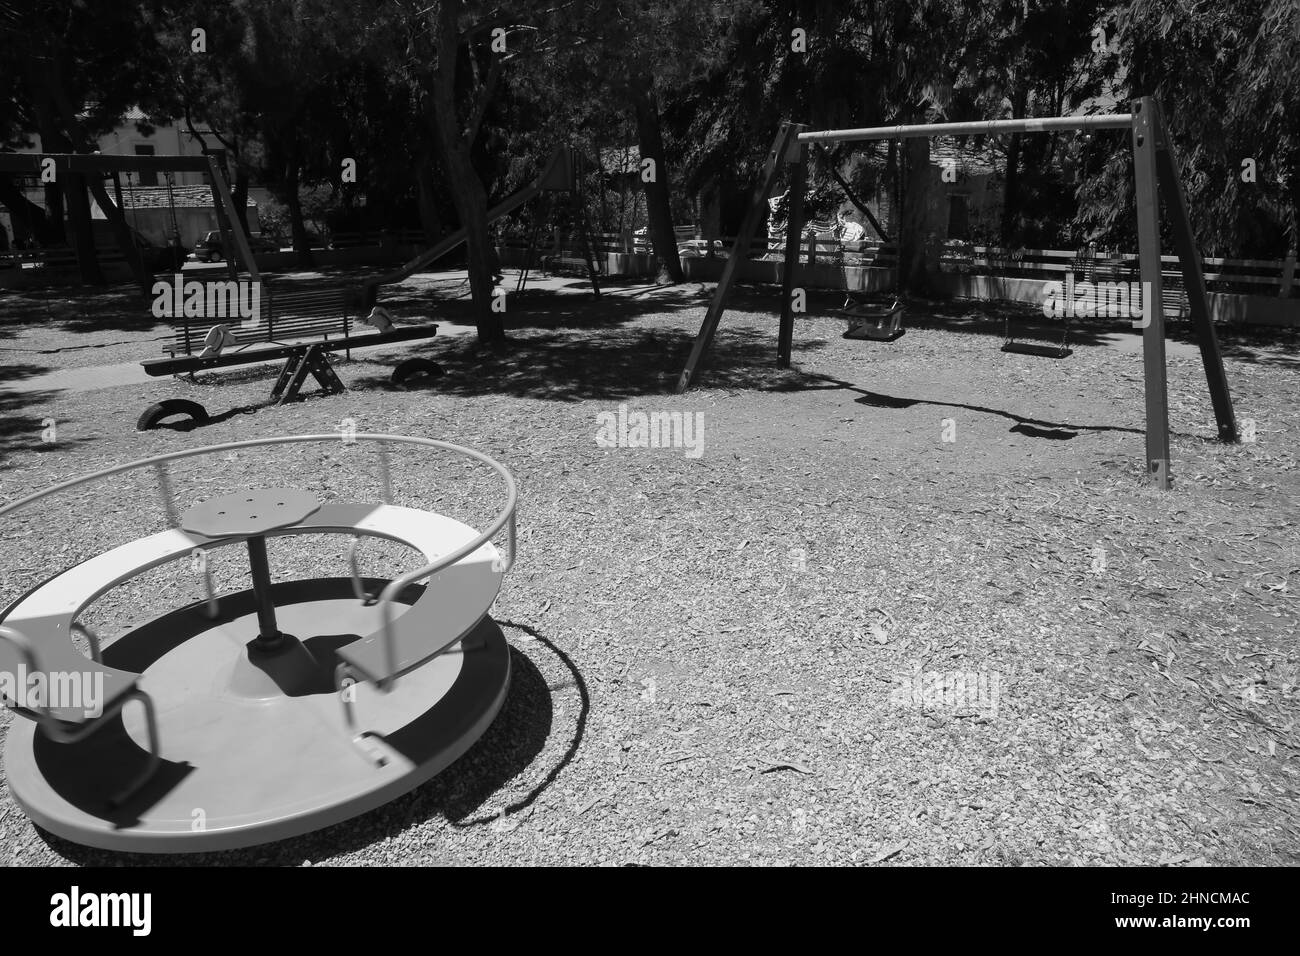 spinning roundabout in a playground without people Stock Photo